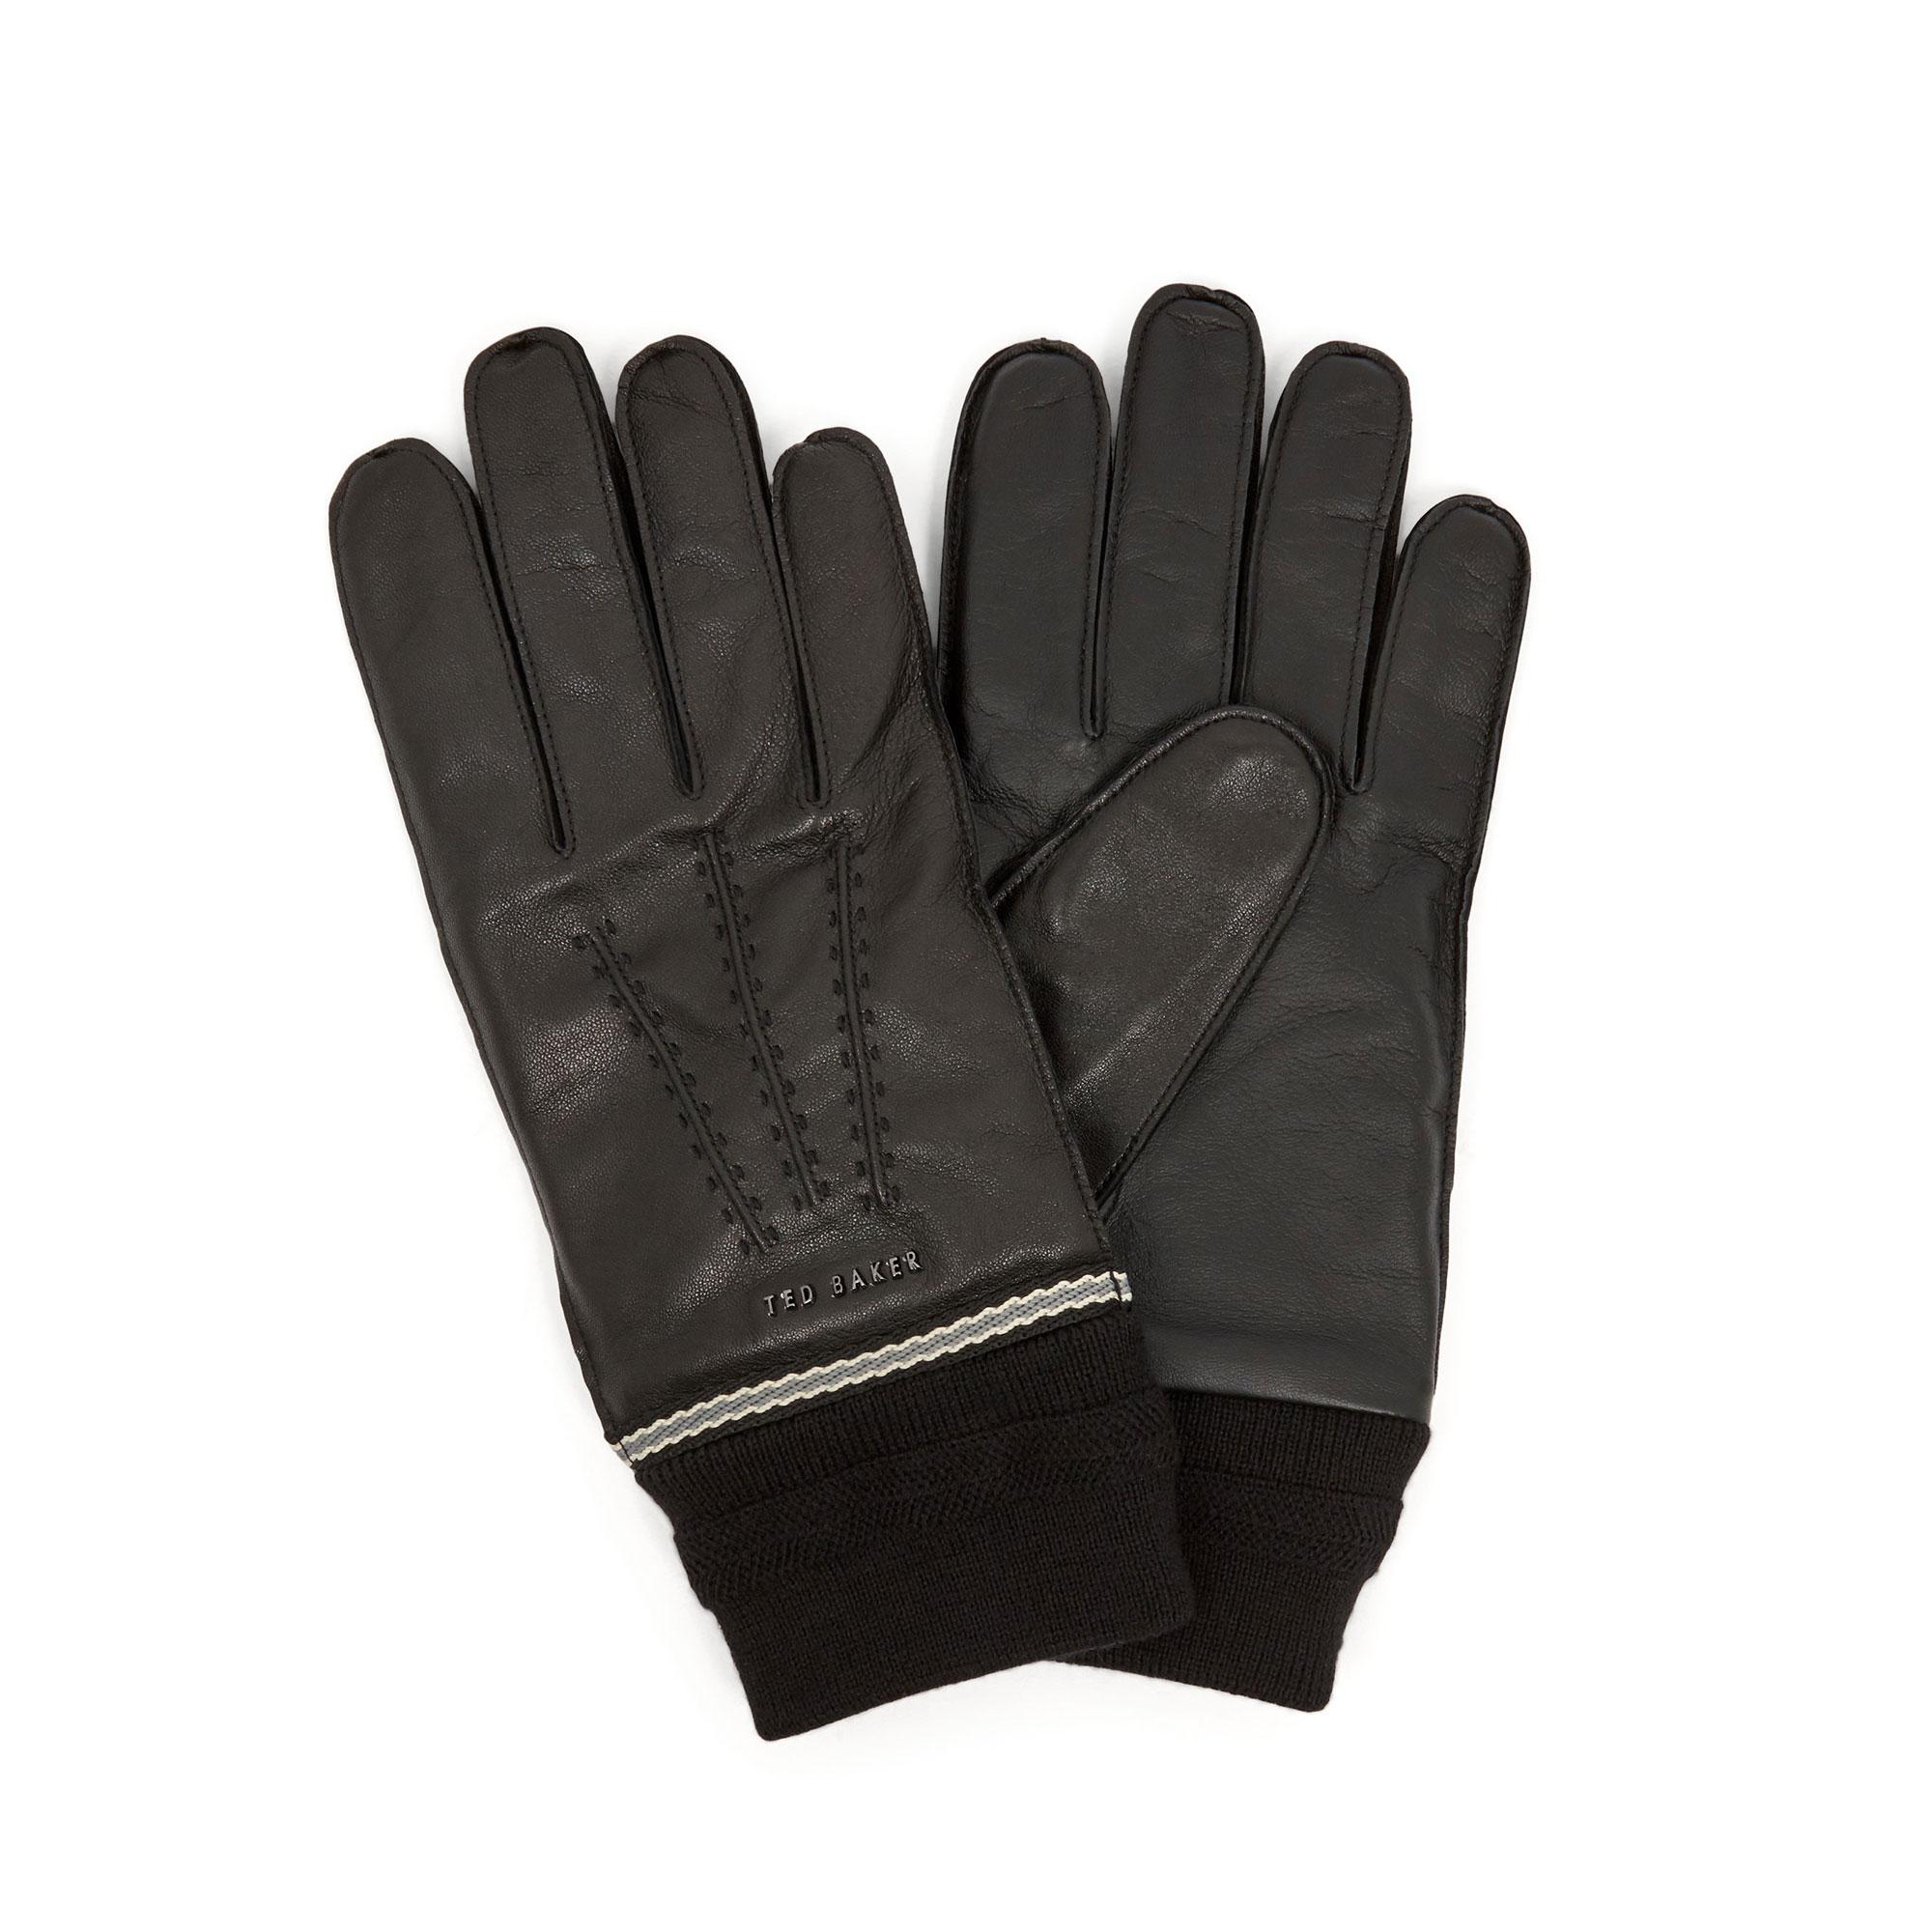 Quirk Webbing Leather Gloves